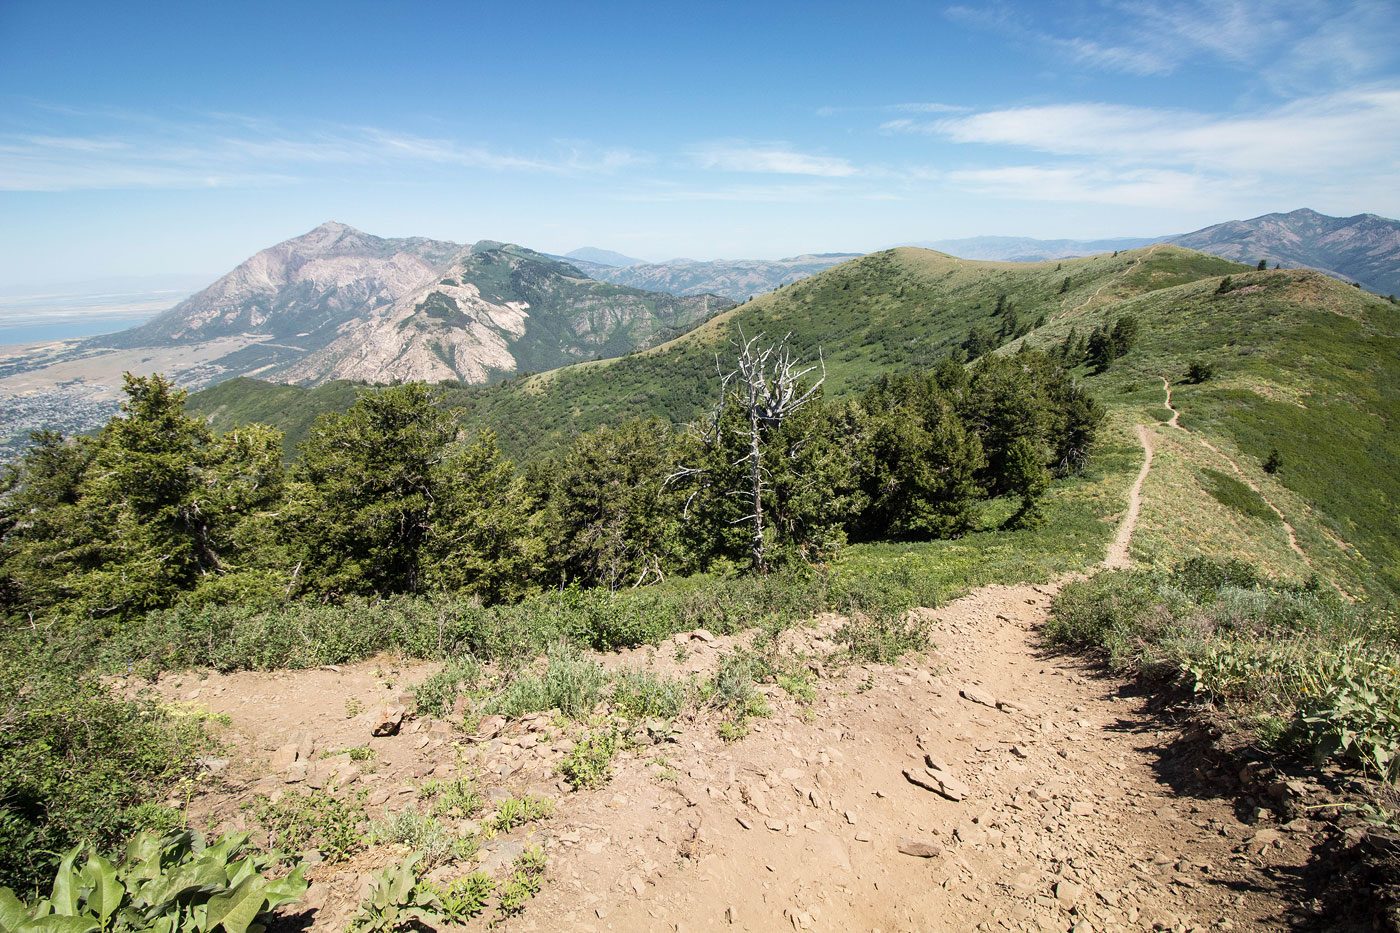 Hike Eyrie Peak and Lewis Peak via South Skyline Trail in Wasatch-Cache National Forest, Utah - Stav is Lost